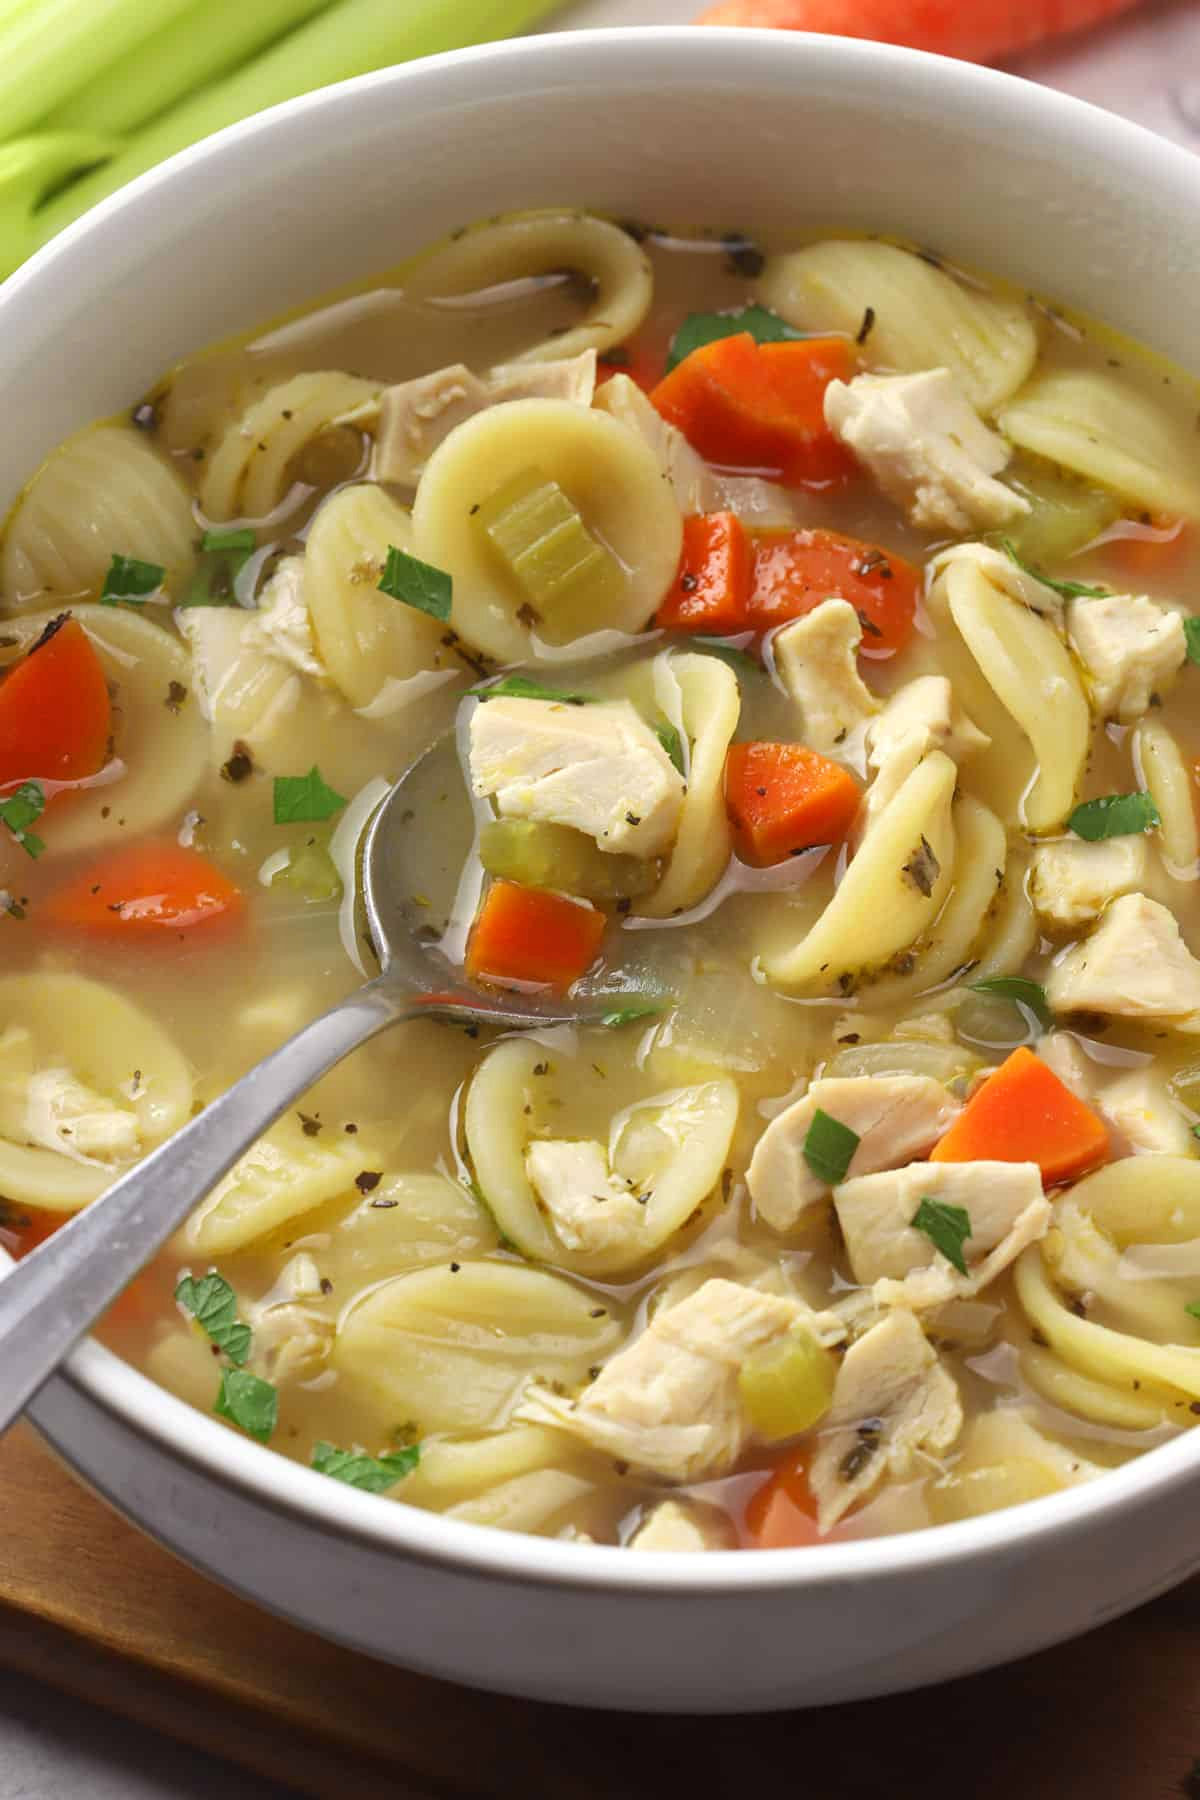 https://thetoastykitchen.com/wp-content/uploads/2022/08/rotisserie-chicken-noodle-soup-with-spoon.jpg